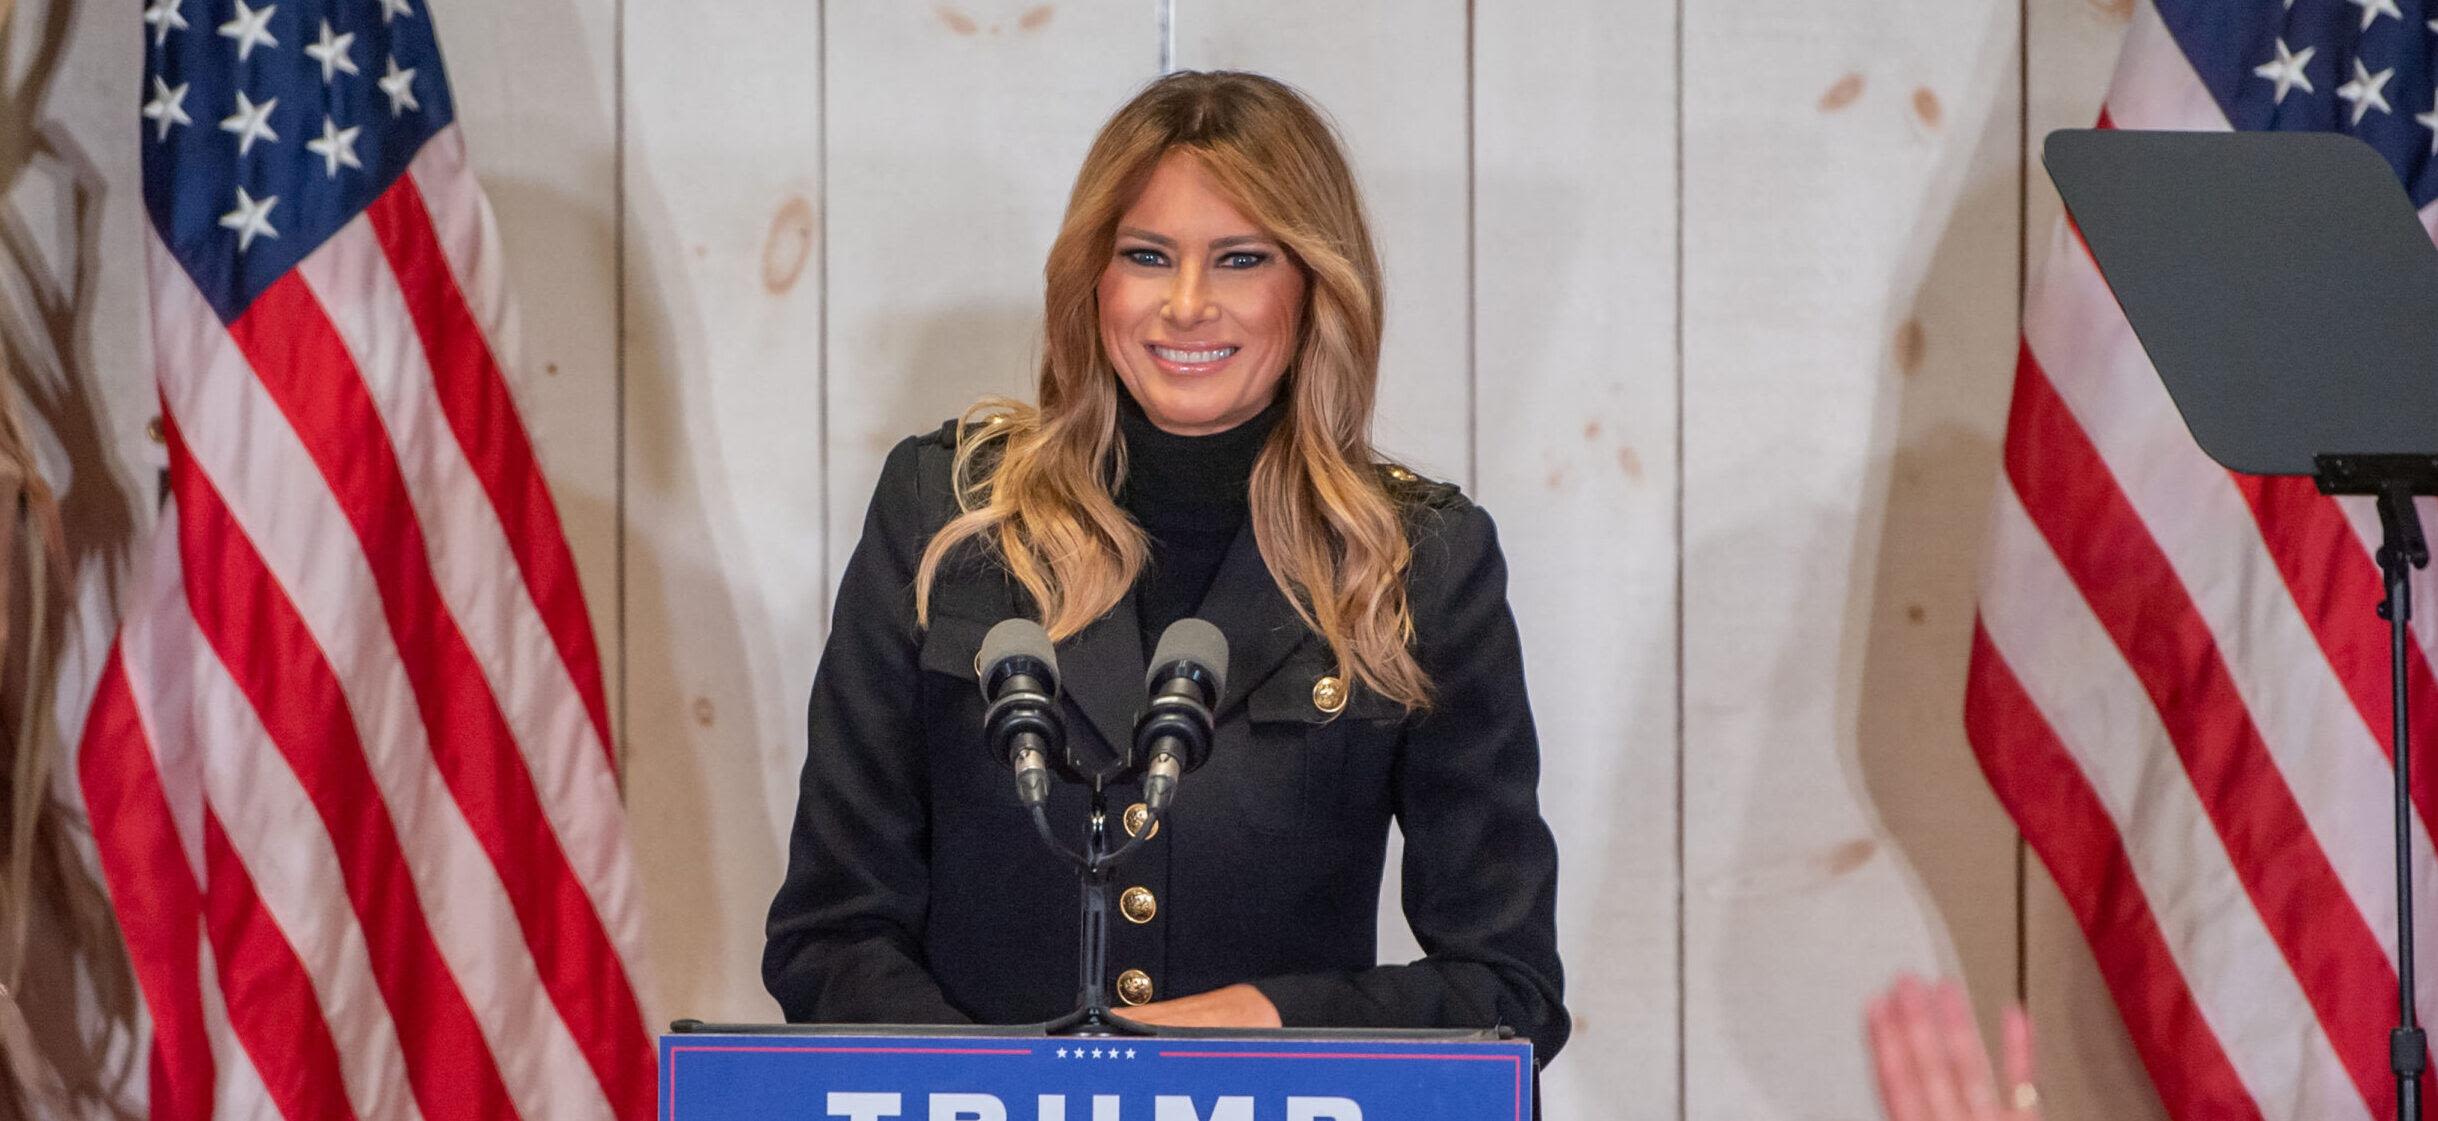 Melania Trump Blasted For Promoting $175 Jewelry Piece For Memorial Day Amid Husband's Trial